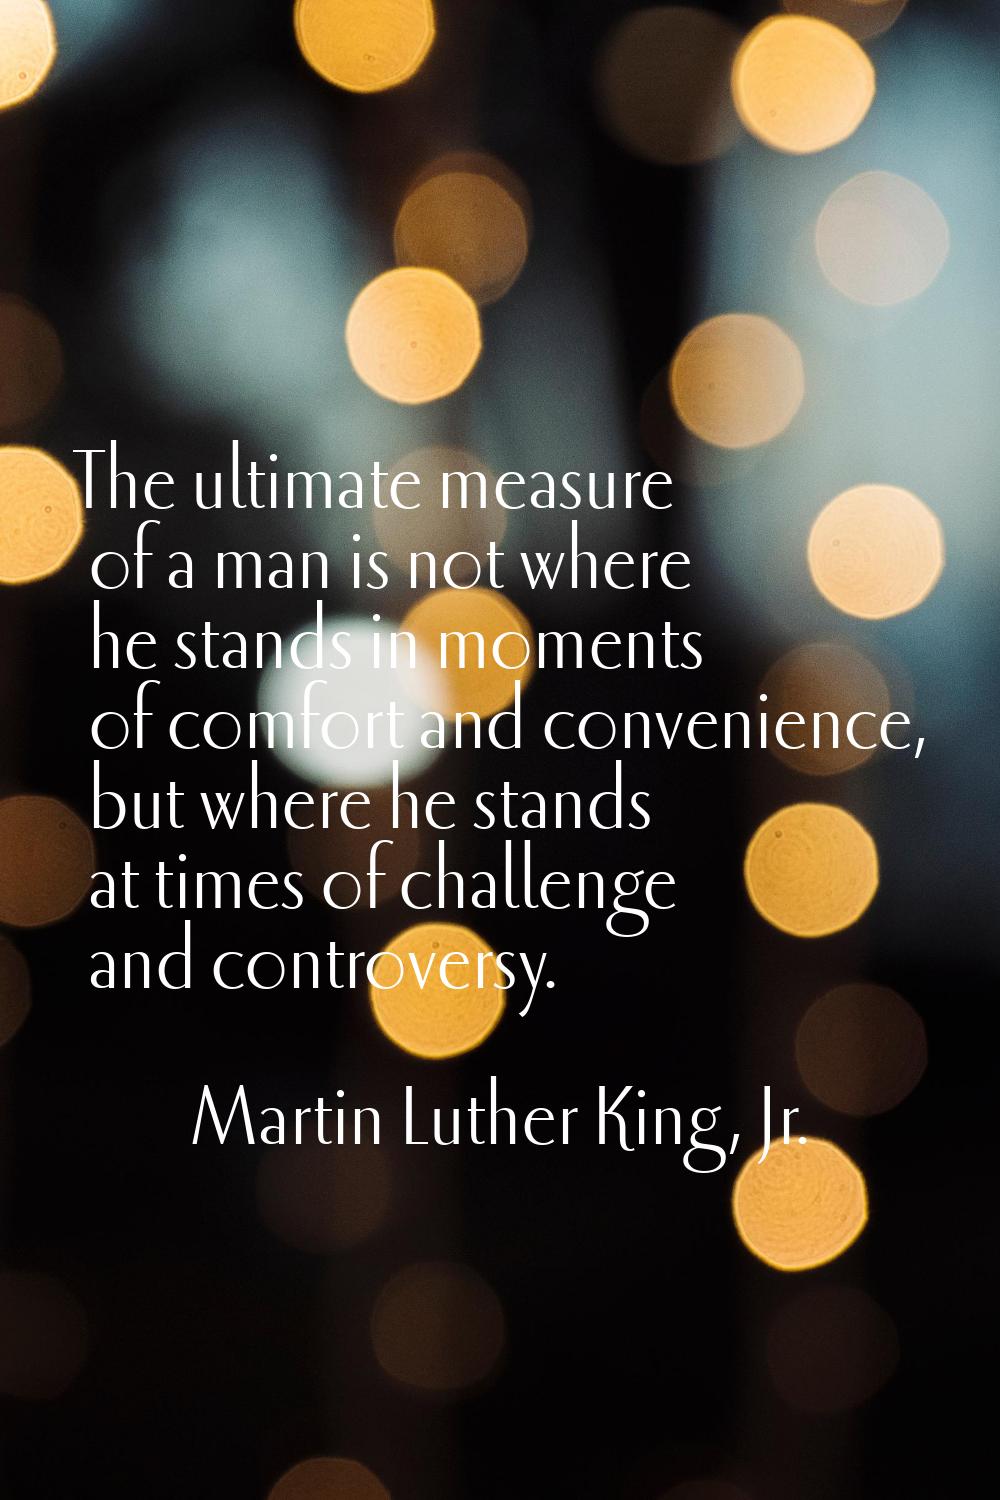 The ultimate measure of a man is not where he stands in moments of comfort and convenience, but whe